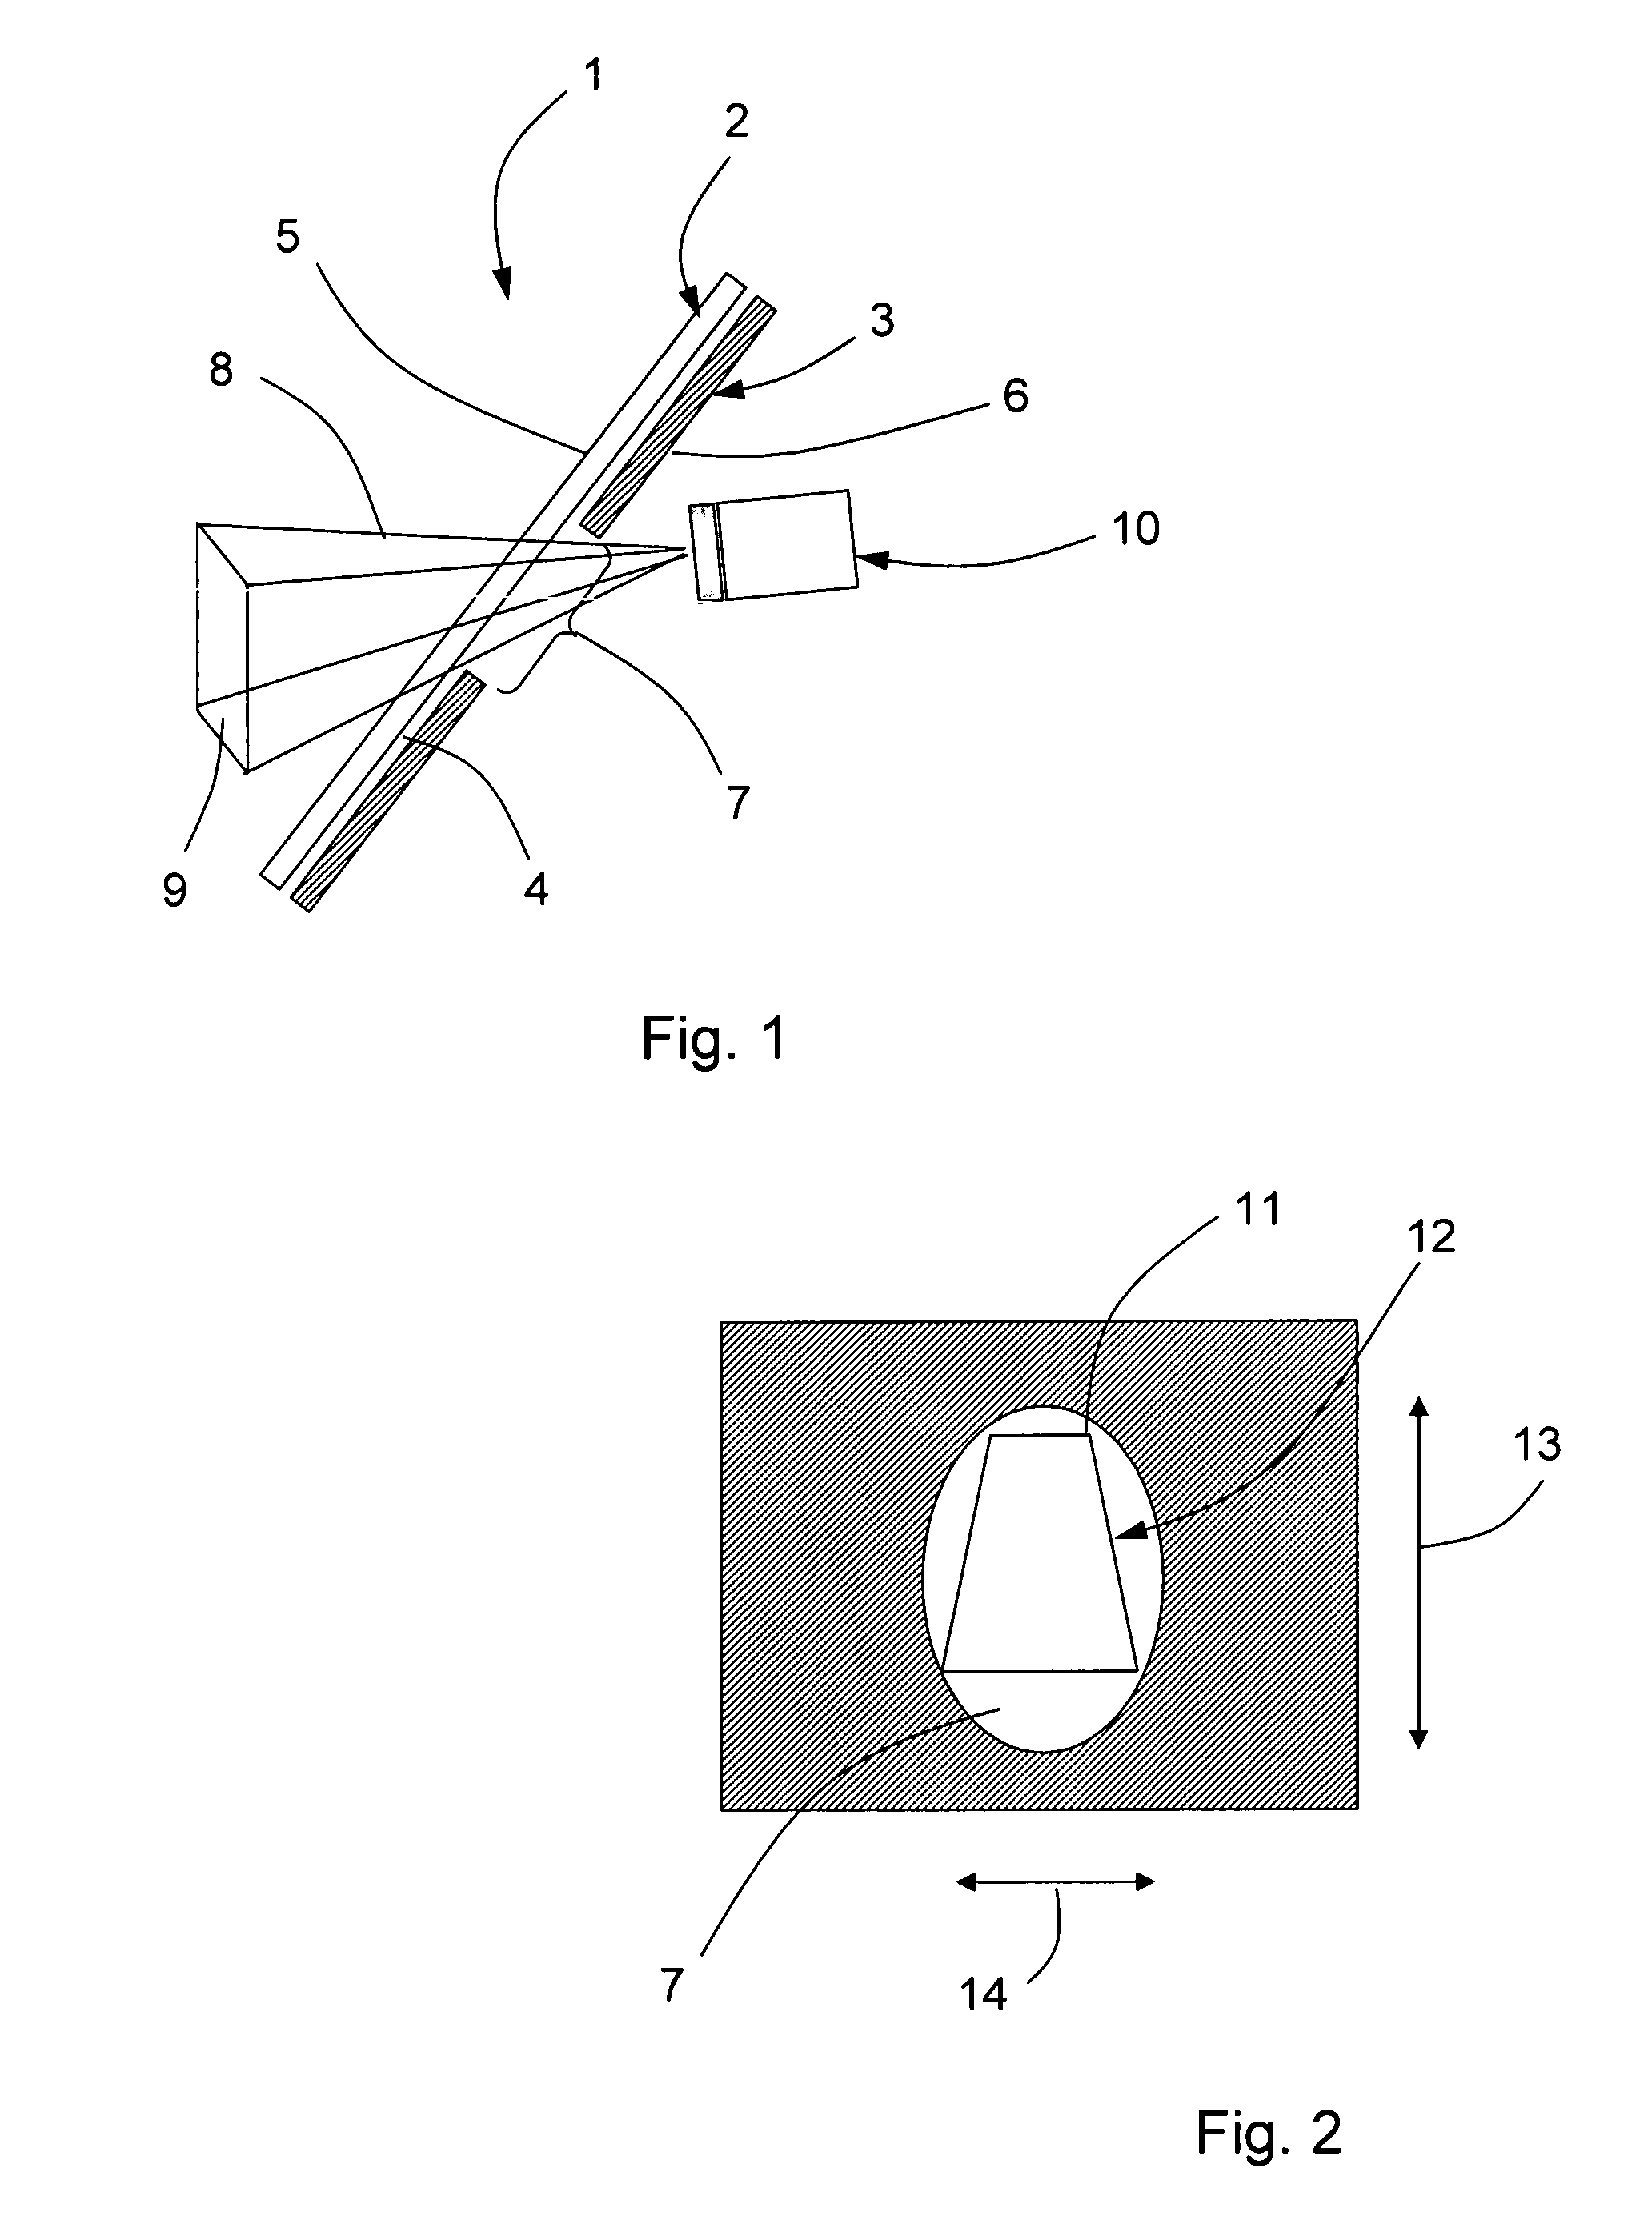 Glass pane having a detector for electromagnetic radiation